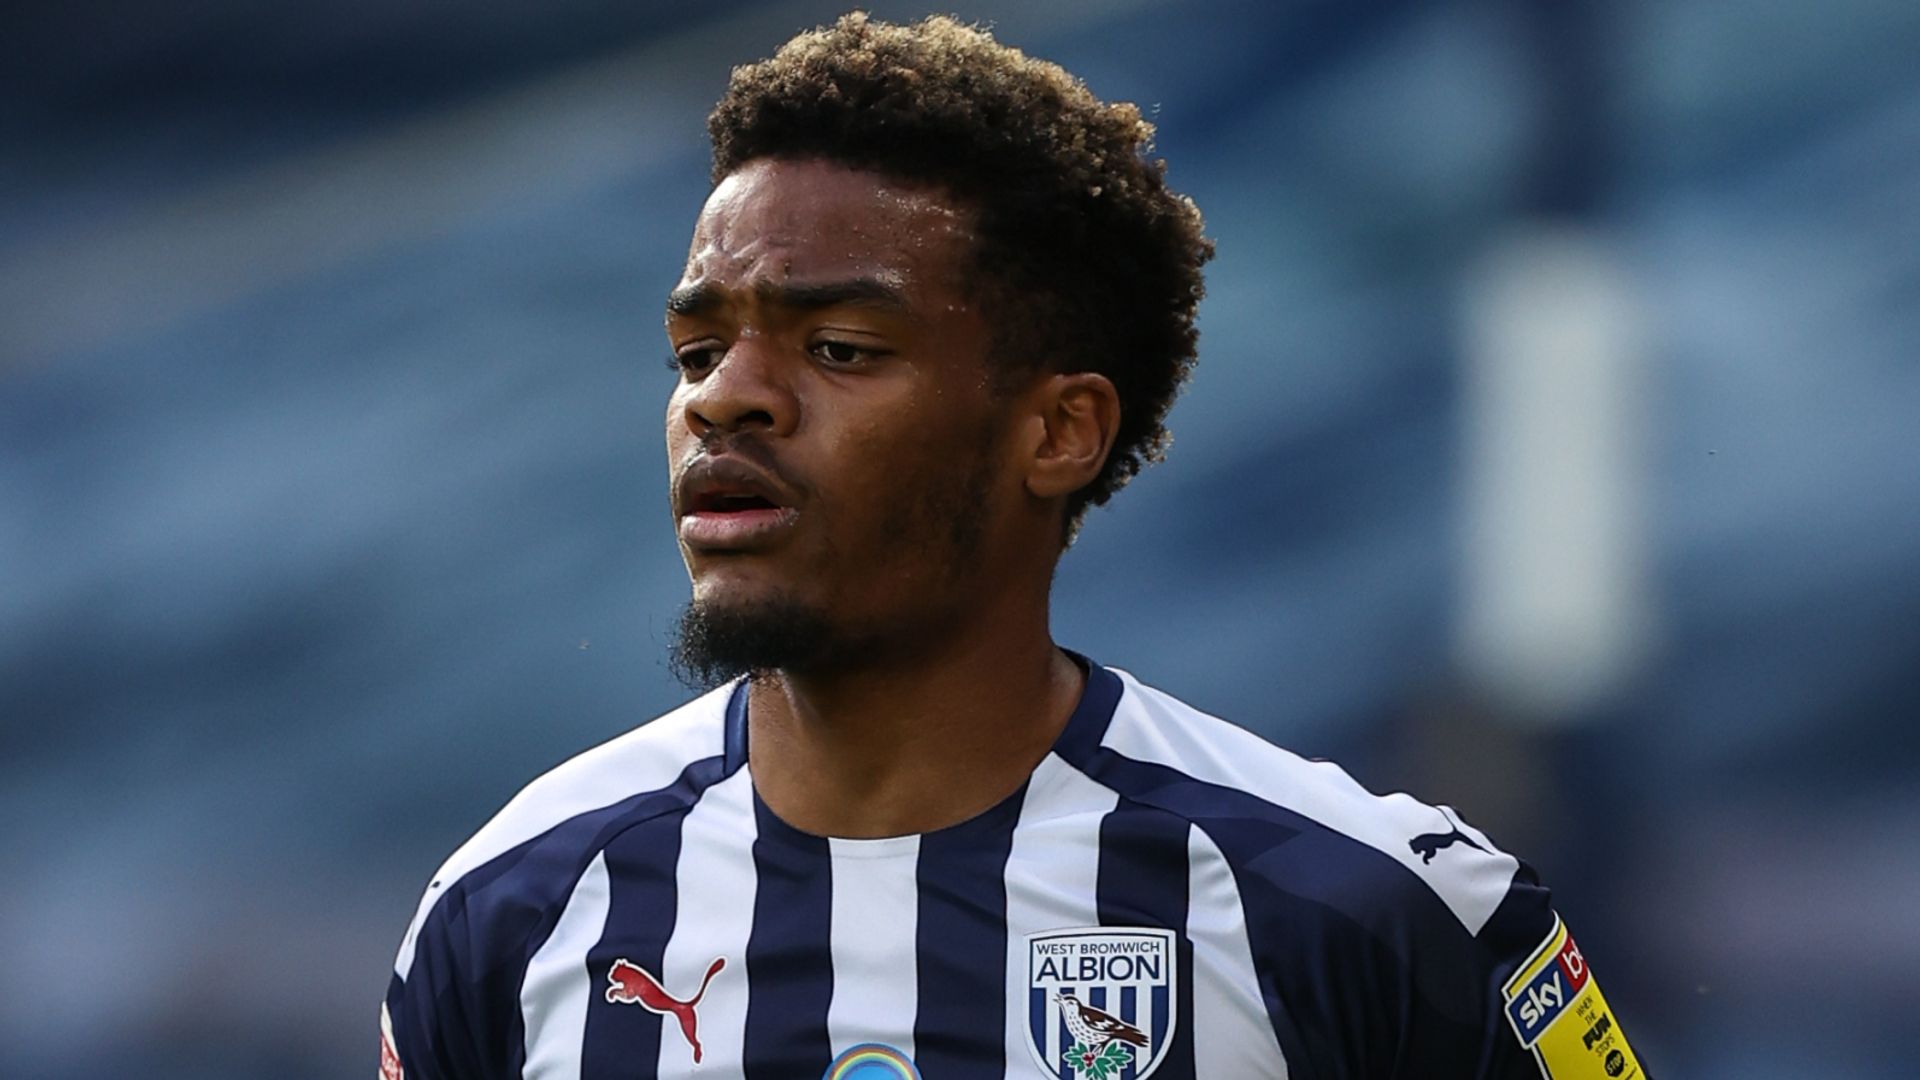 Noble 'angry' as West Brom sign Diangana